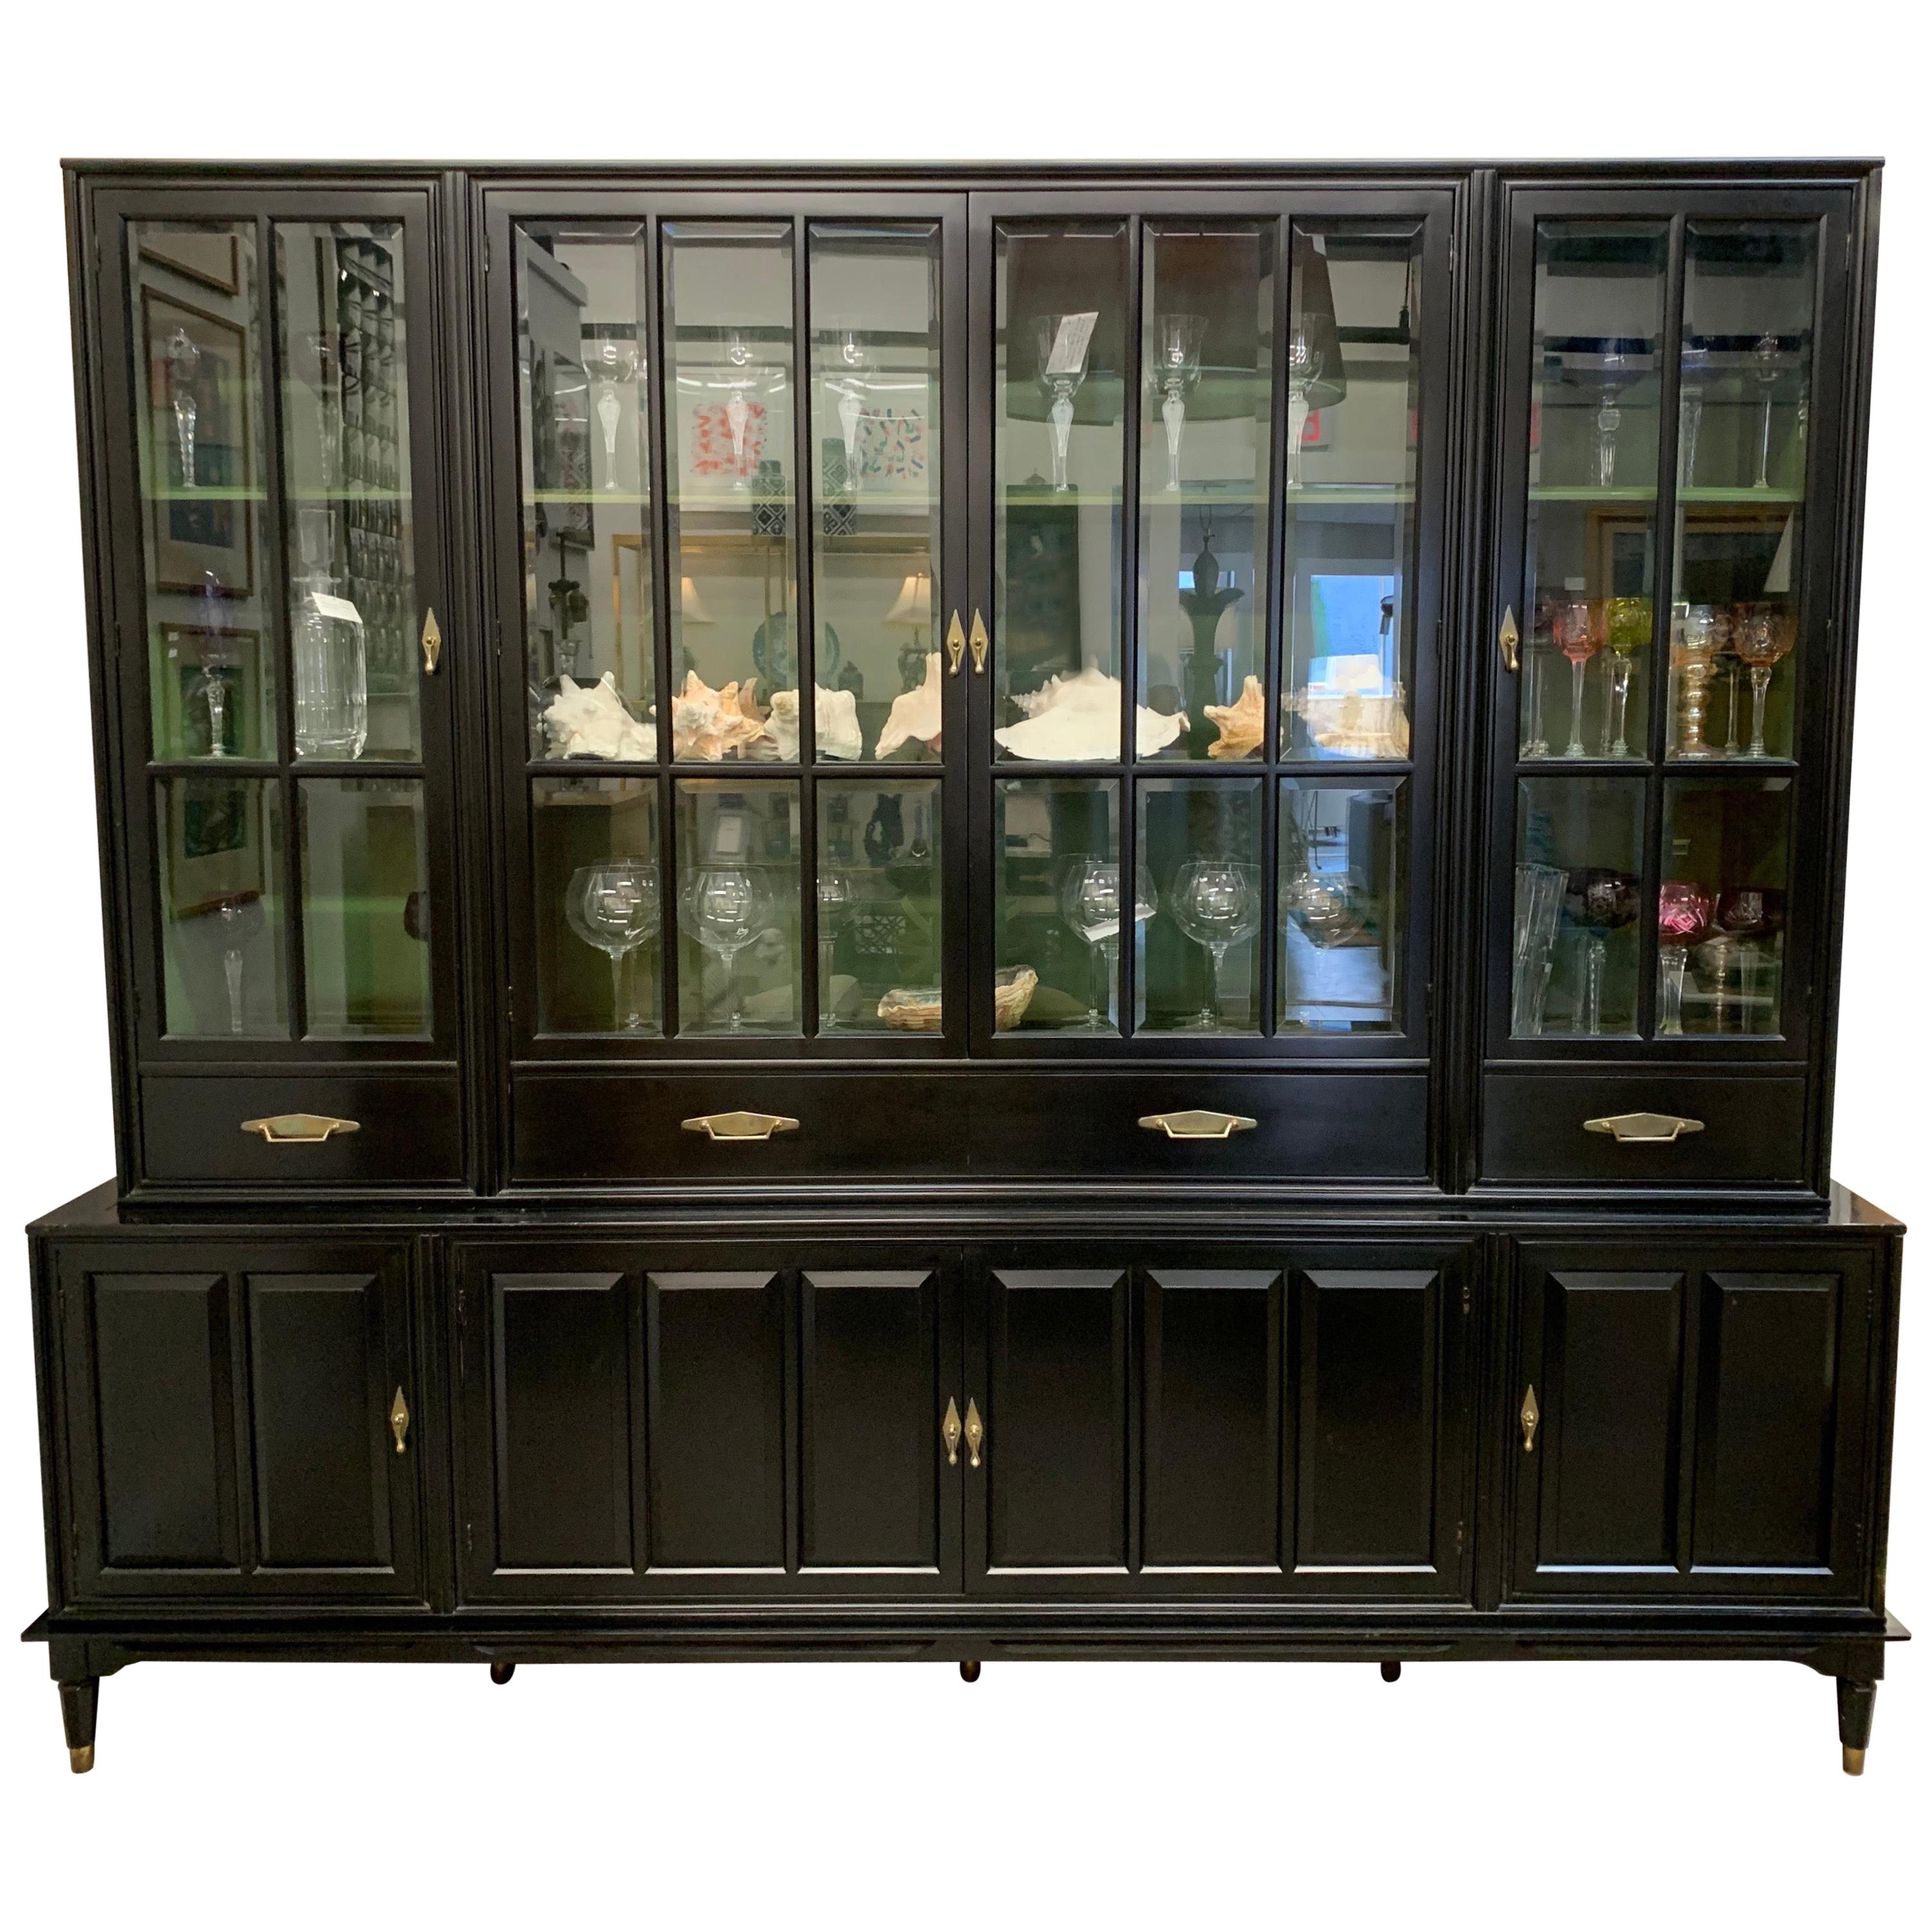 Black Midcentury Bookcase Display Cabinet Sideboard Union National